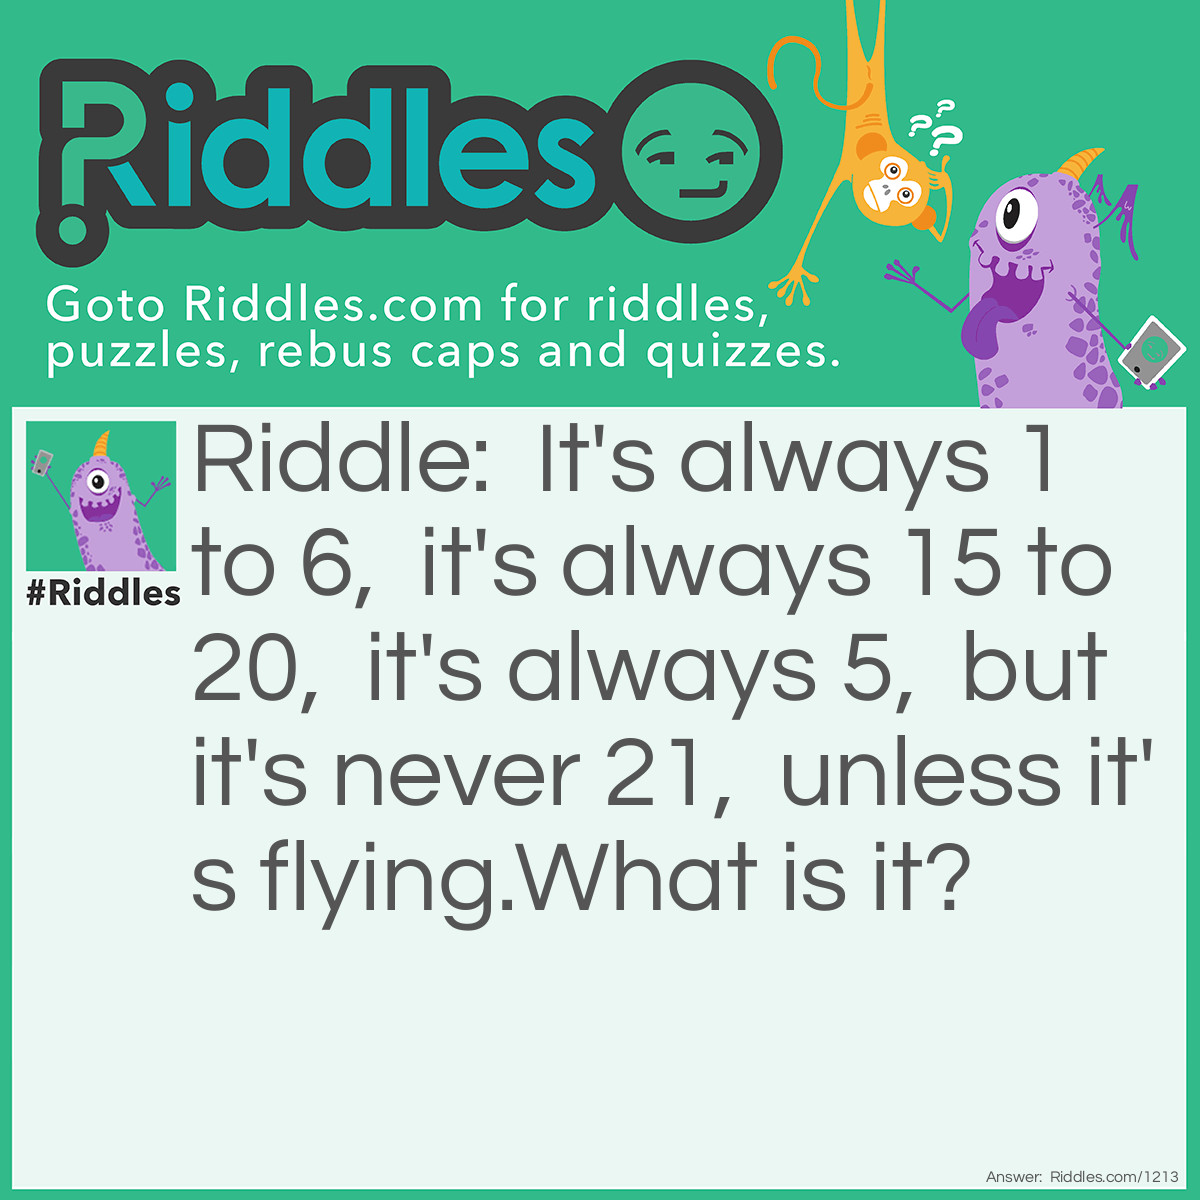 Riddle: It's always 1 to 6,  it's always 15 to 20,  it's always 5,  but it's never 21,  unless it's flying.
What is it? Answer: The answer is: a dice. An explanation: "It's always 1 to 6": the numbers on the faces of the dice, "it's always 15 to 20": the sum of the exposed faces when the dice comes to rest after being thrown, "it's always 5": the number of exposed faces when the dice is at rest, "but it's never 21": the sum of the exposed faces is never 21 when the dice is at rest, "unless it's flying": the sum of all exposed faces when the dice is flying is 21 (1 + 2 + 3 + 4 + 5 + 6).